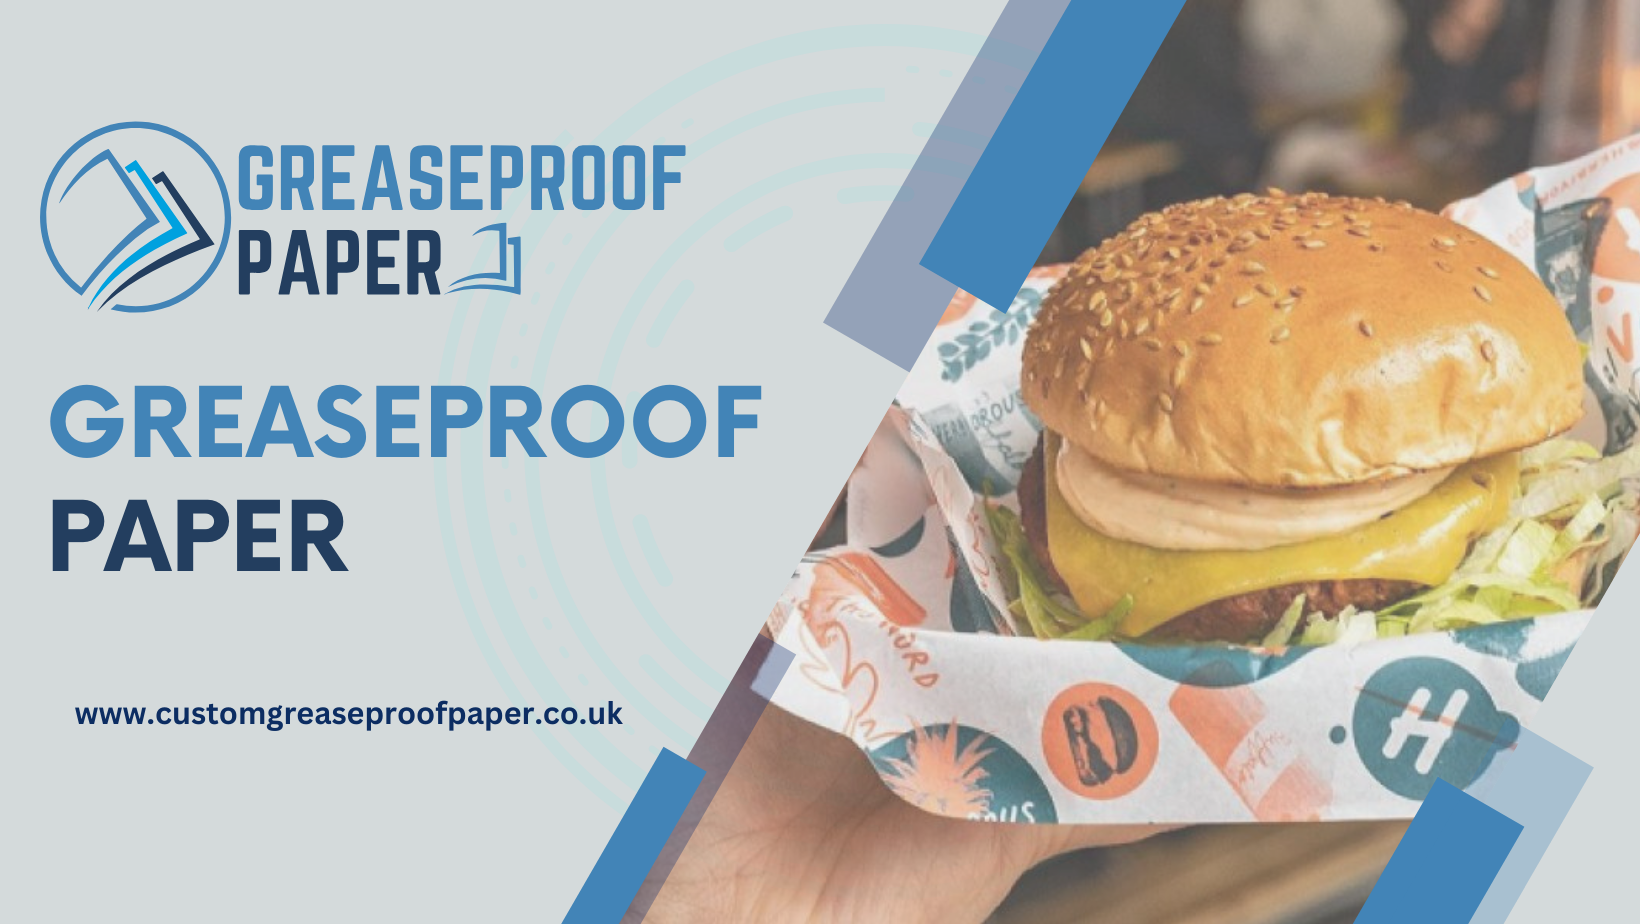 Branded Greaseproof Wraps cover